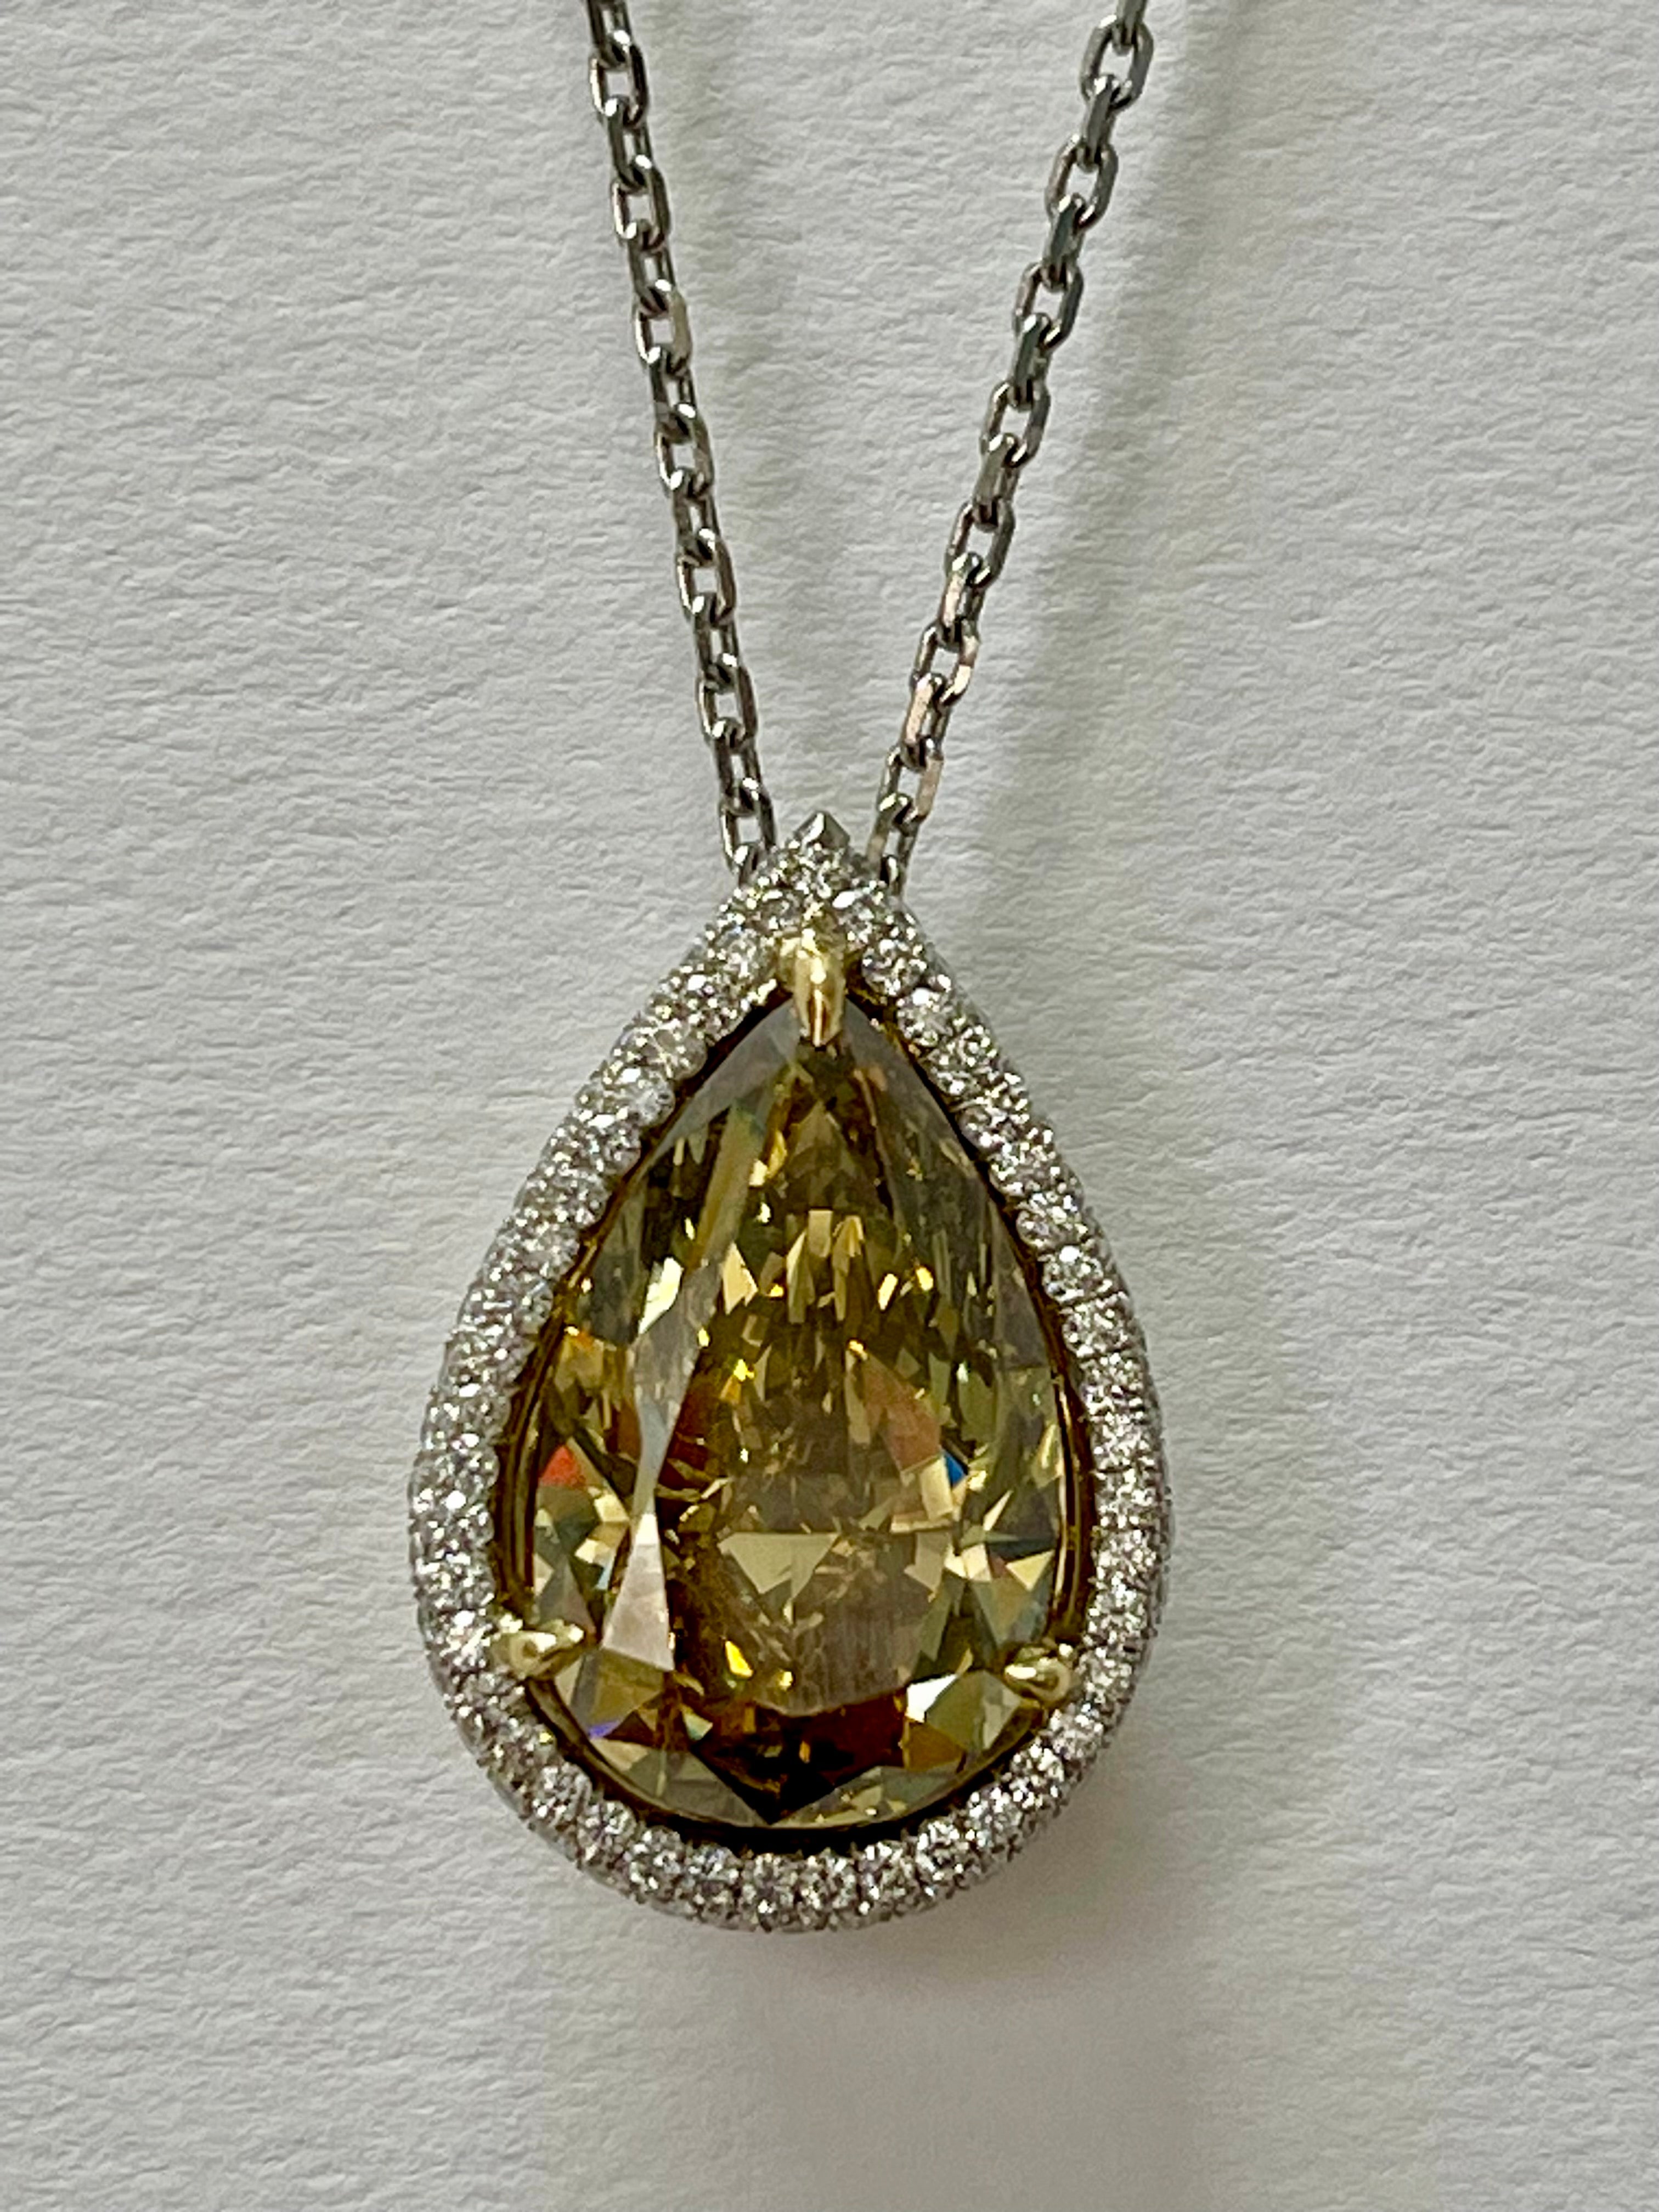 This absolutely stunning and unique GIA certified 12.11 carat Fancy Deep Brownish Greenish Yellow Pear Shape Diamond Necklace beautifully handcrafted in 18k yellow and white gold. 

The details are as follows : 

Pear shape diamond : 12.11 carat